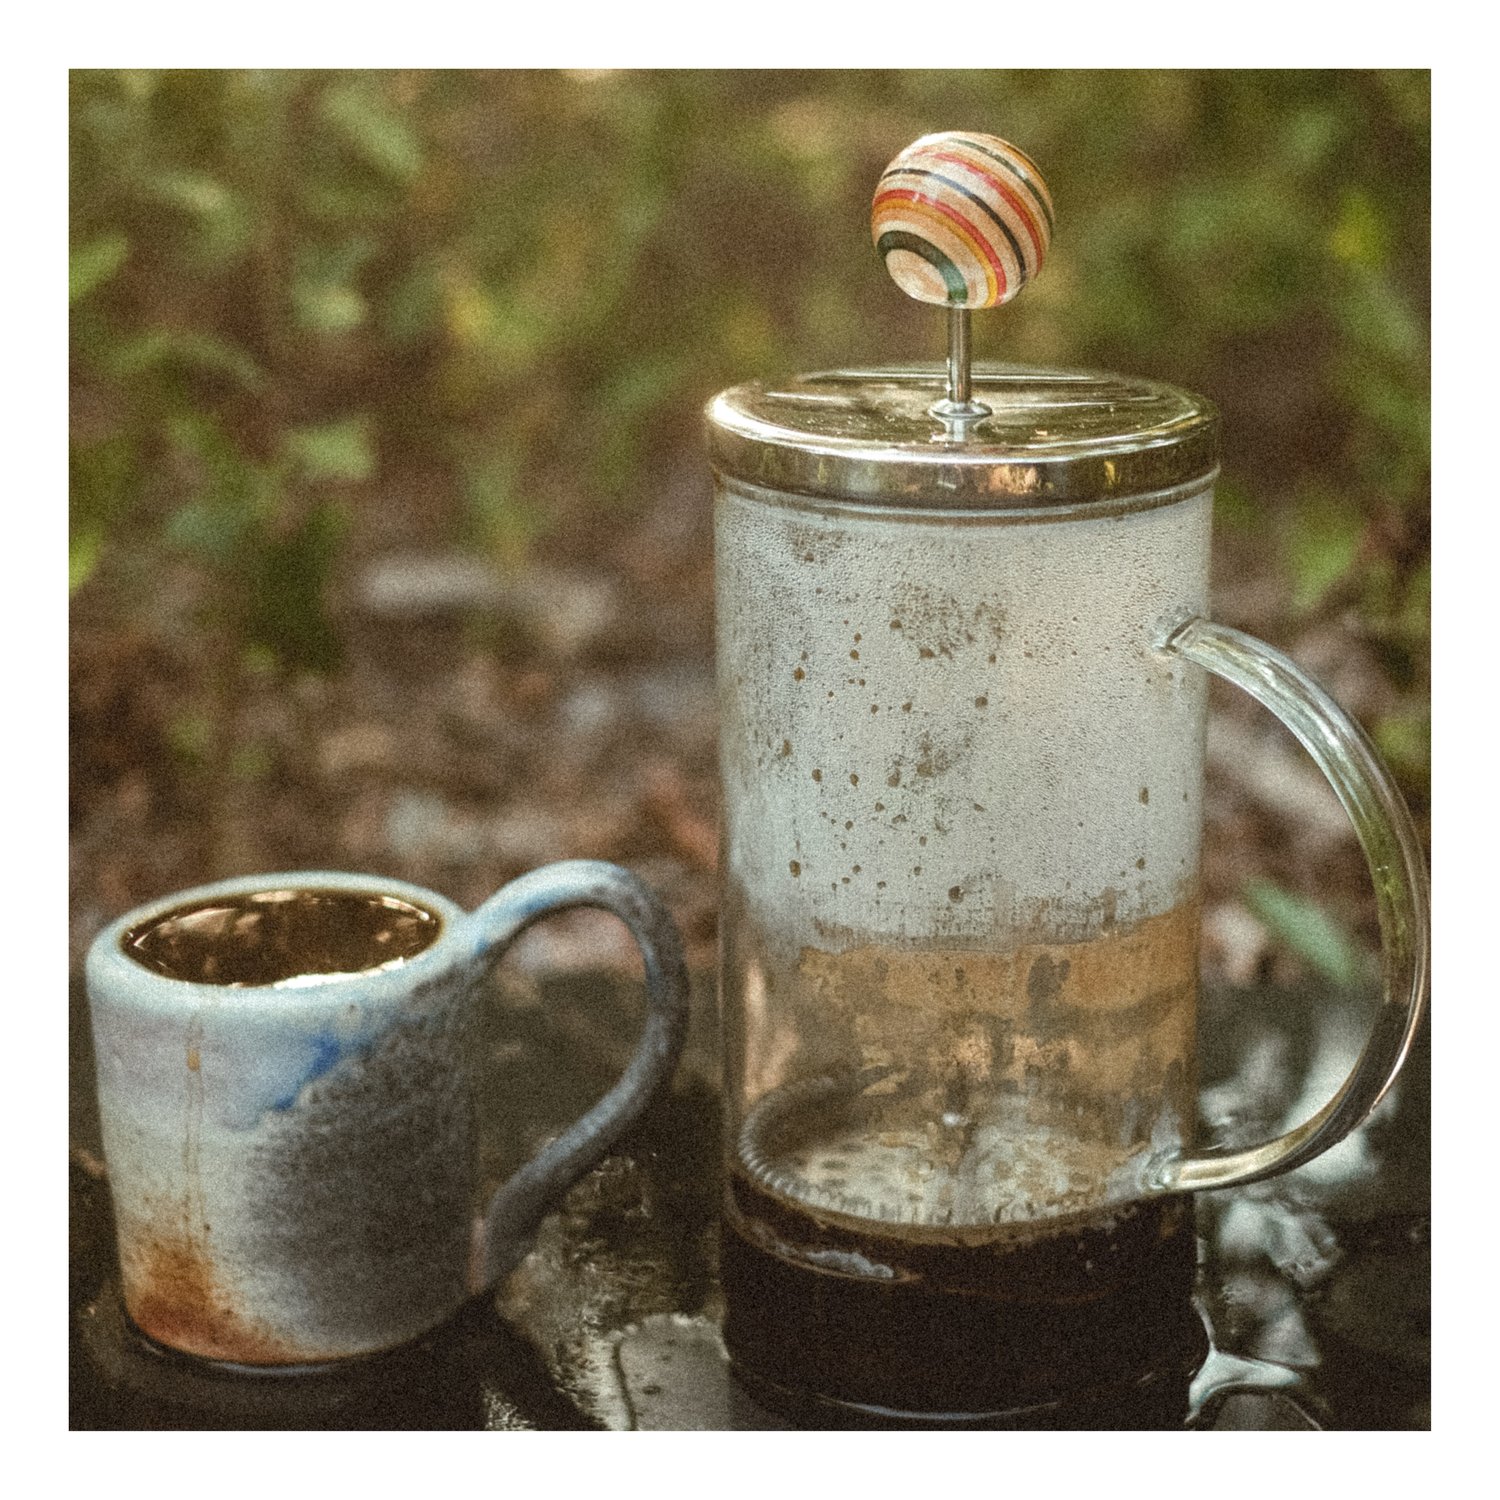 Image of French press